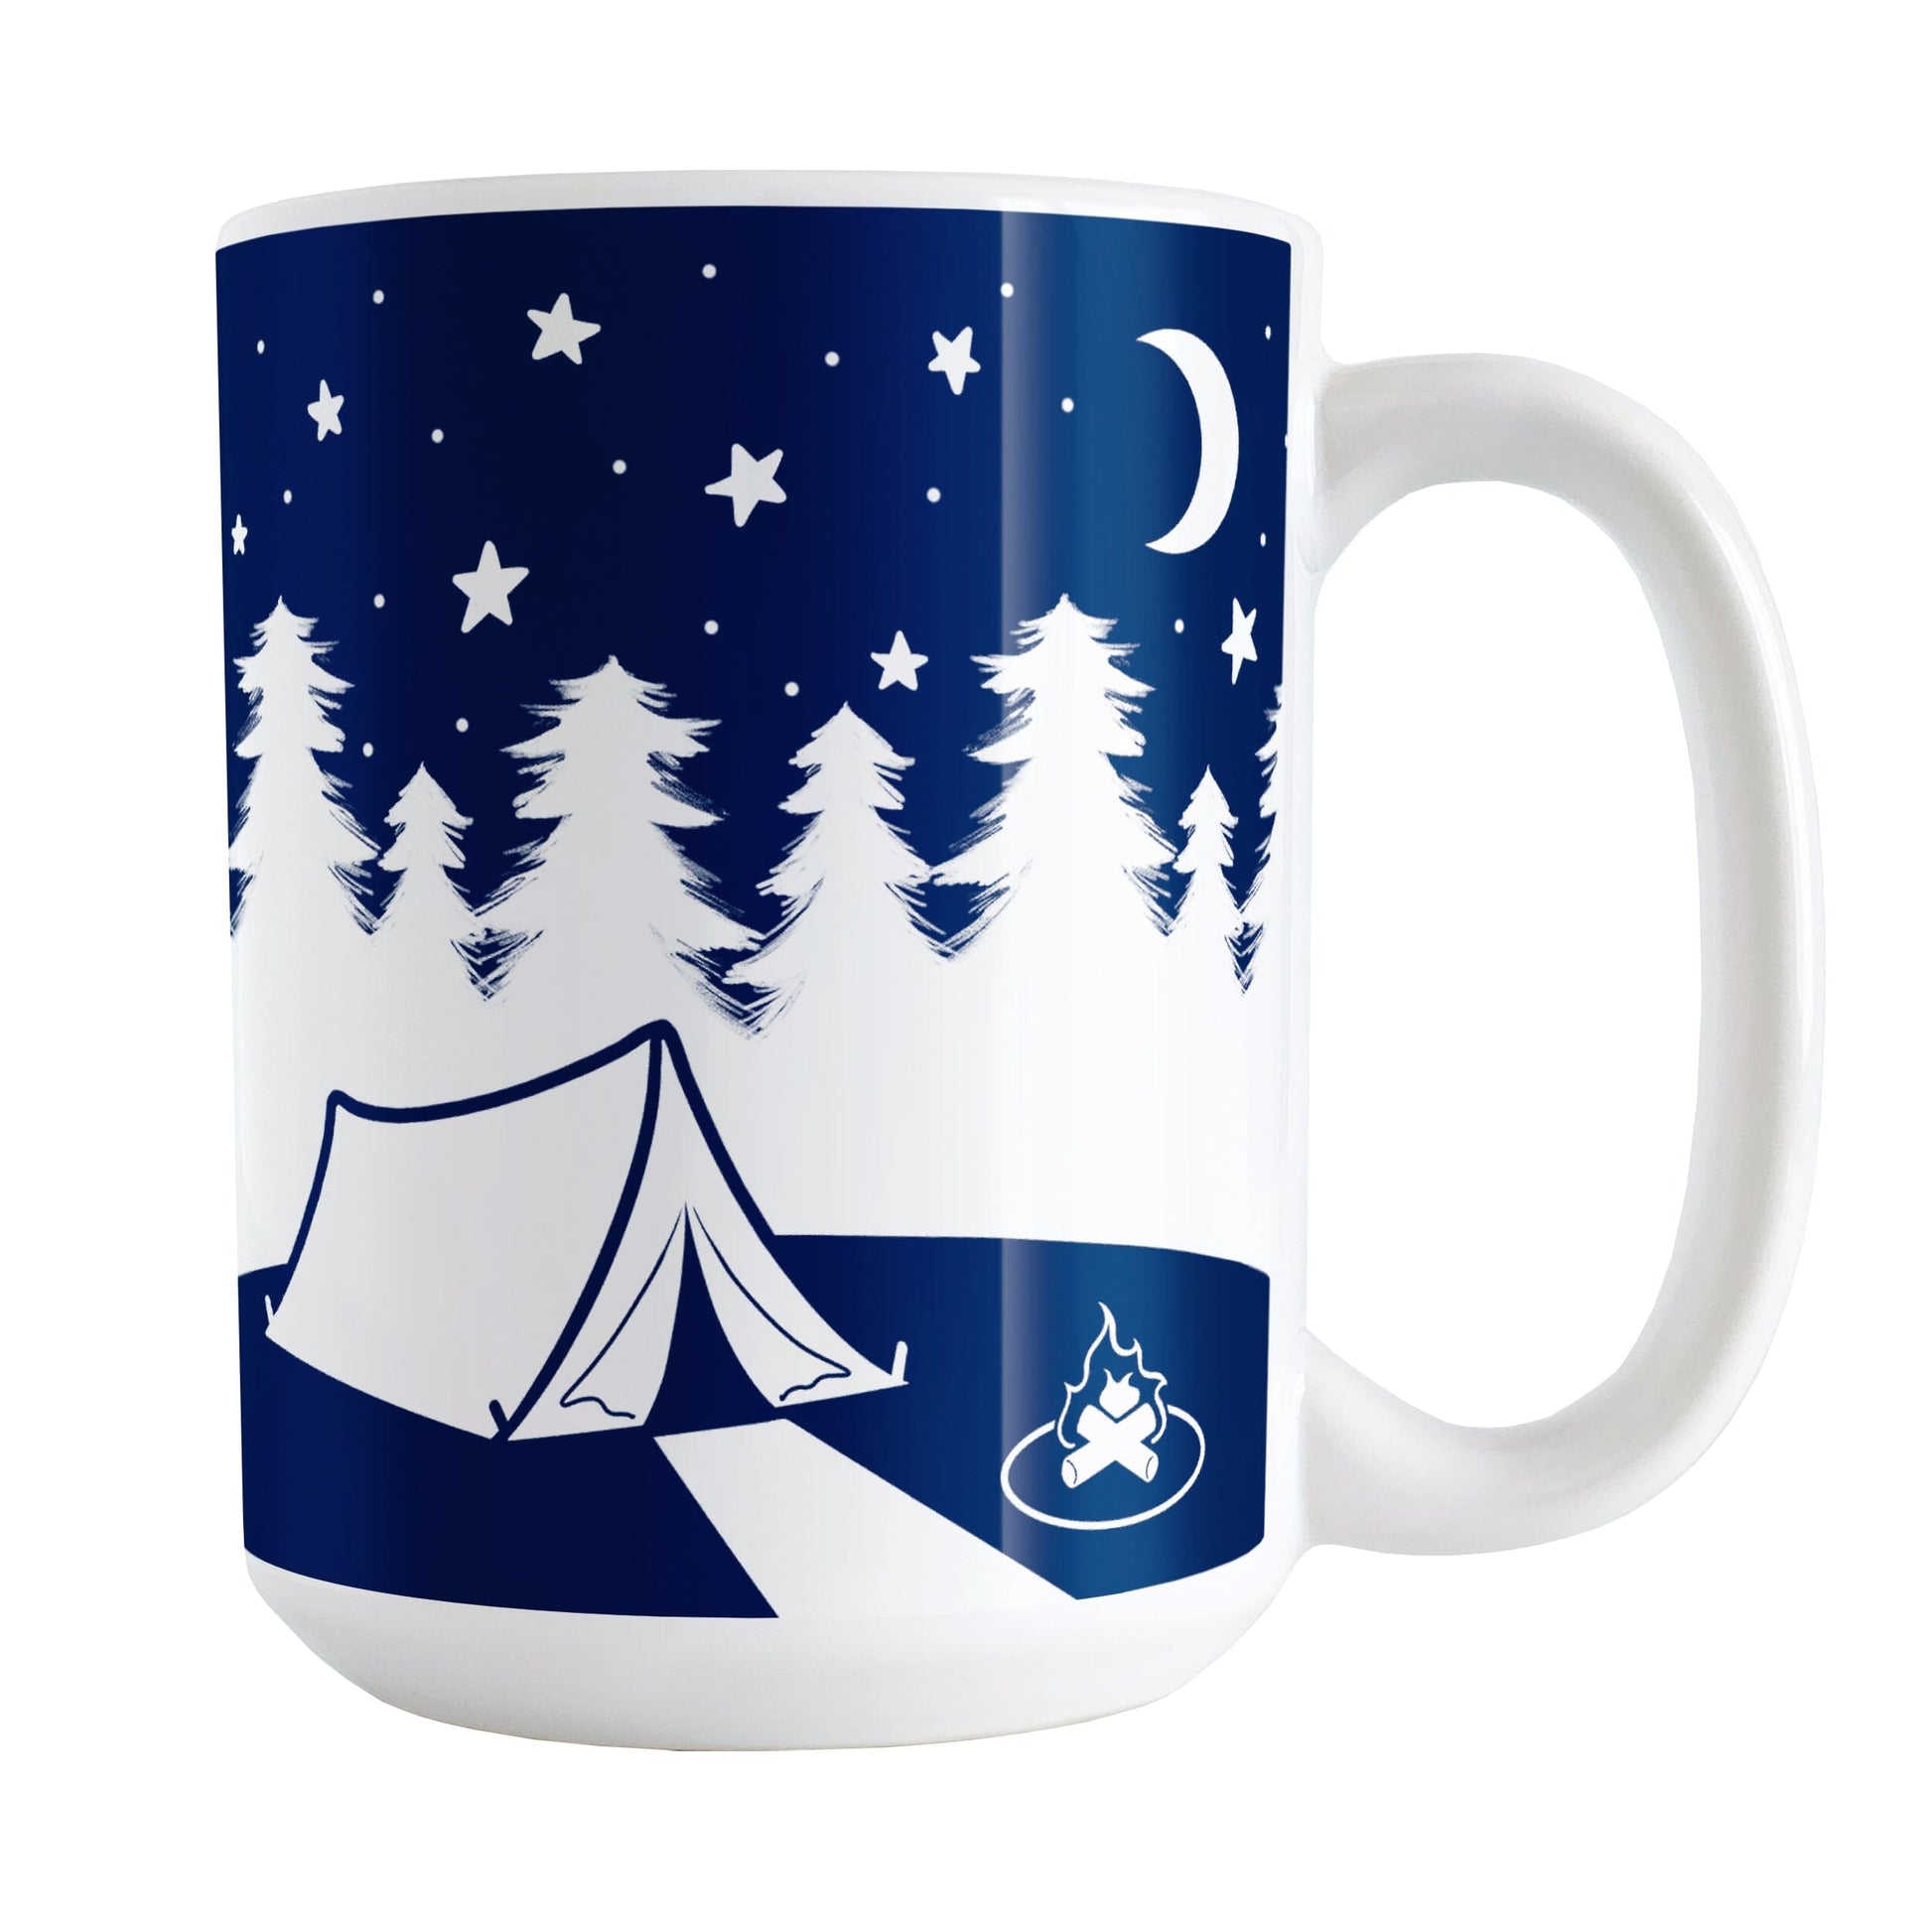 Night Sky Camping Mug (15oz) at Amy's Coffee Mugs. A ceramic coffee mug designed with a blue and white illustration of a camping tent on a hill with a campfire, white trees behind the hill, and a sky filled with whimsical hand-drawn stars and a moon.